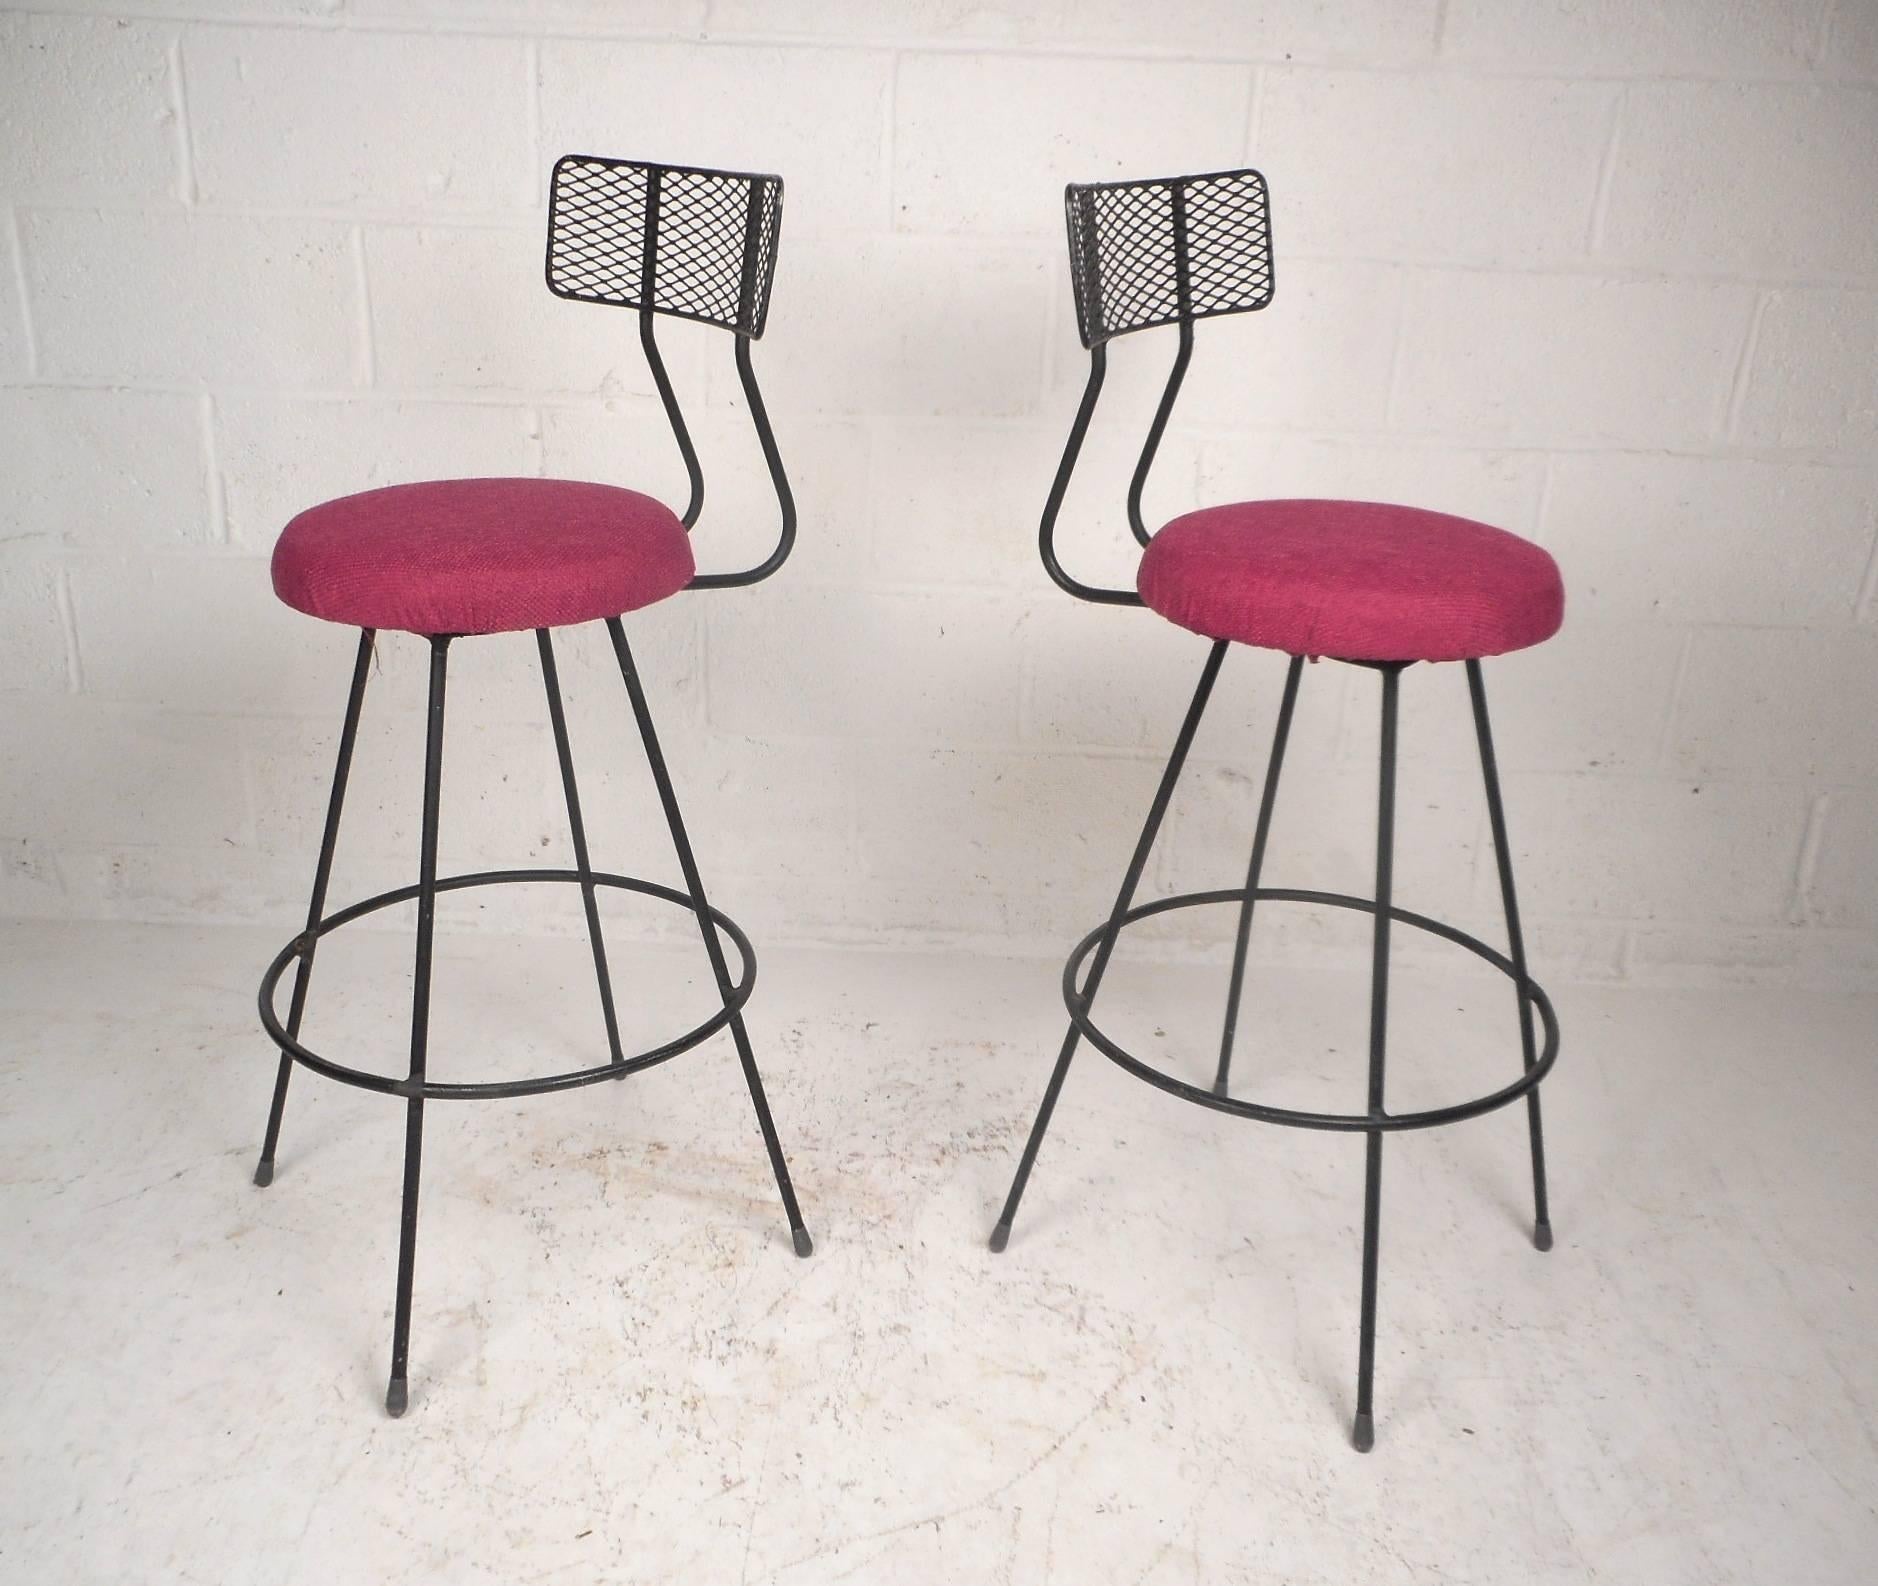 Stunning pair of vintage modern bar stools with grated metal back rests and iron rod bases. Wonderful design with a conveniently placed circular kick rest and long splayed legs. Sturdy construction and elaborate colorful upholstery make this